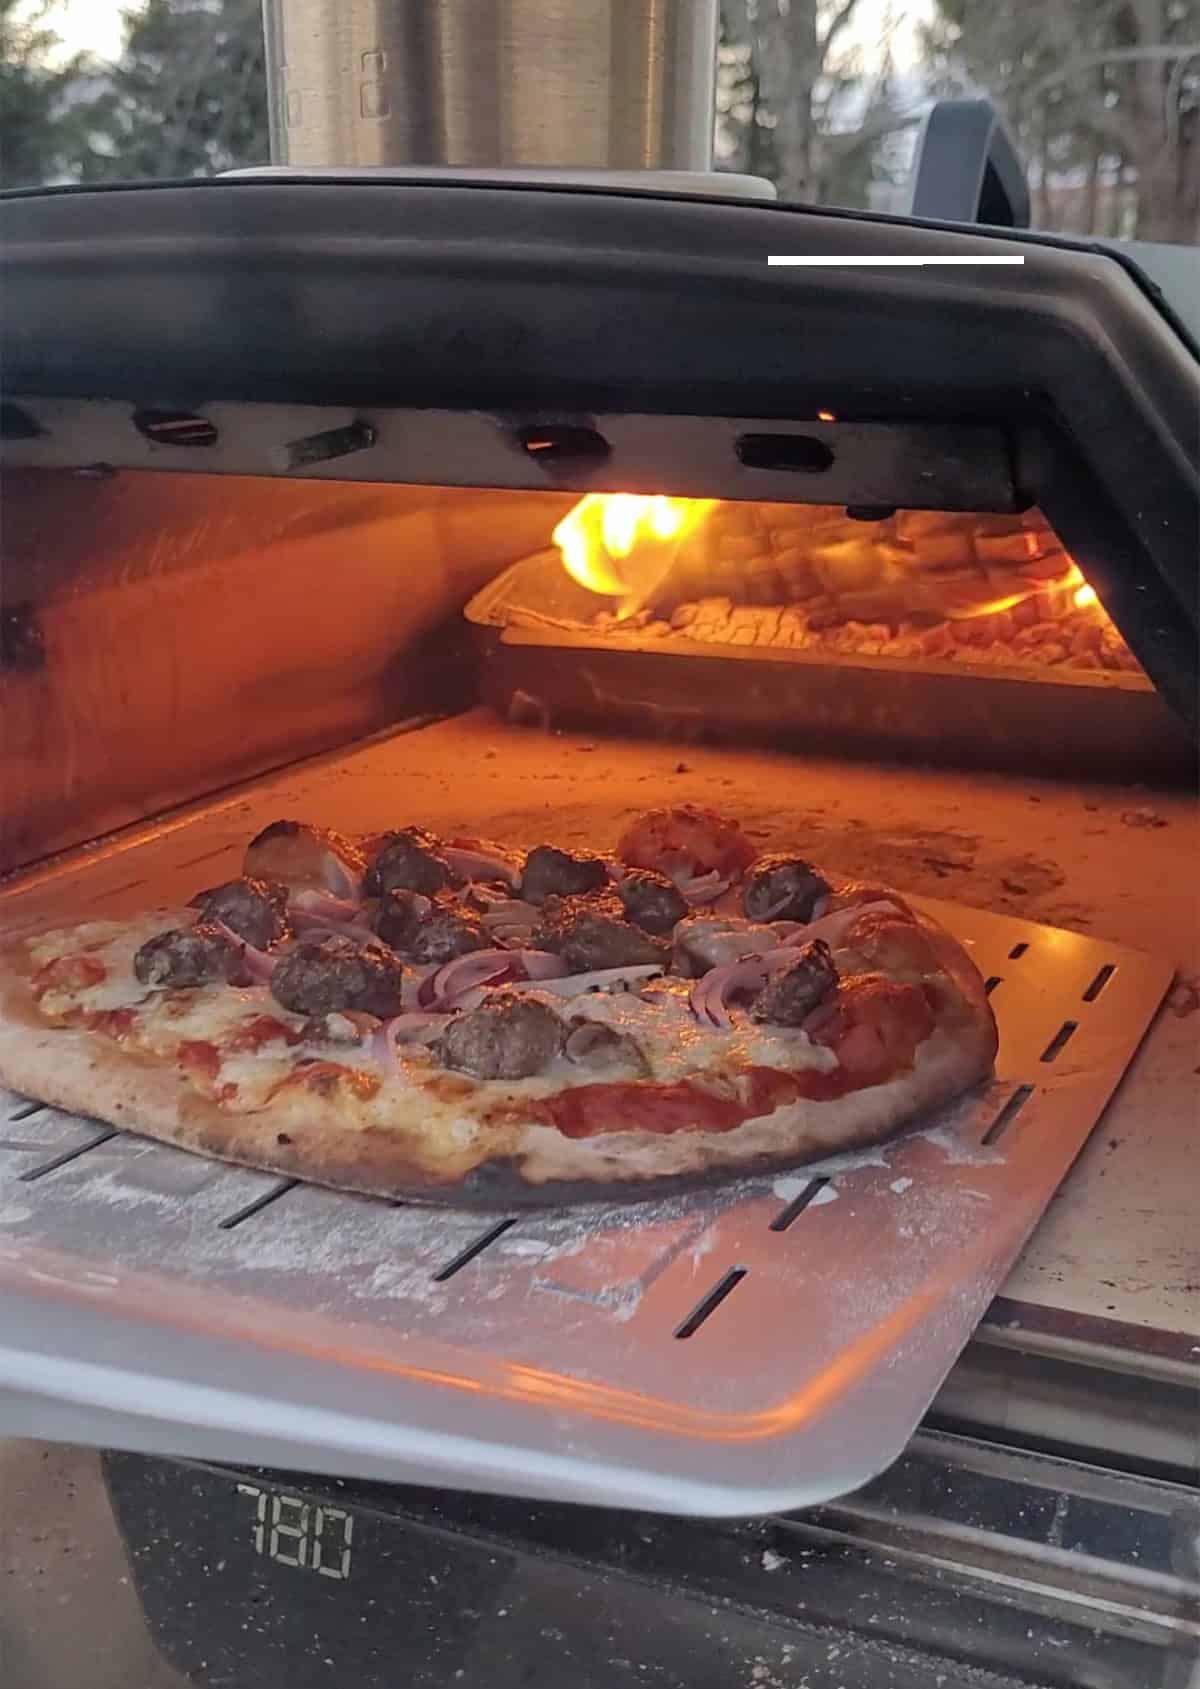 Taking out a meatball pizza from the Ooni pizza oven.